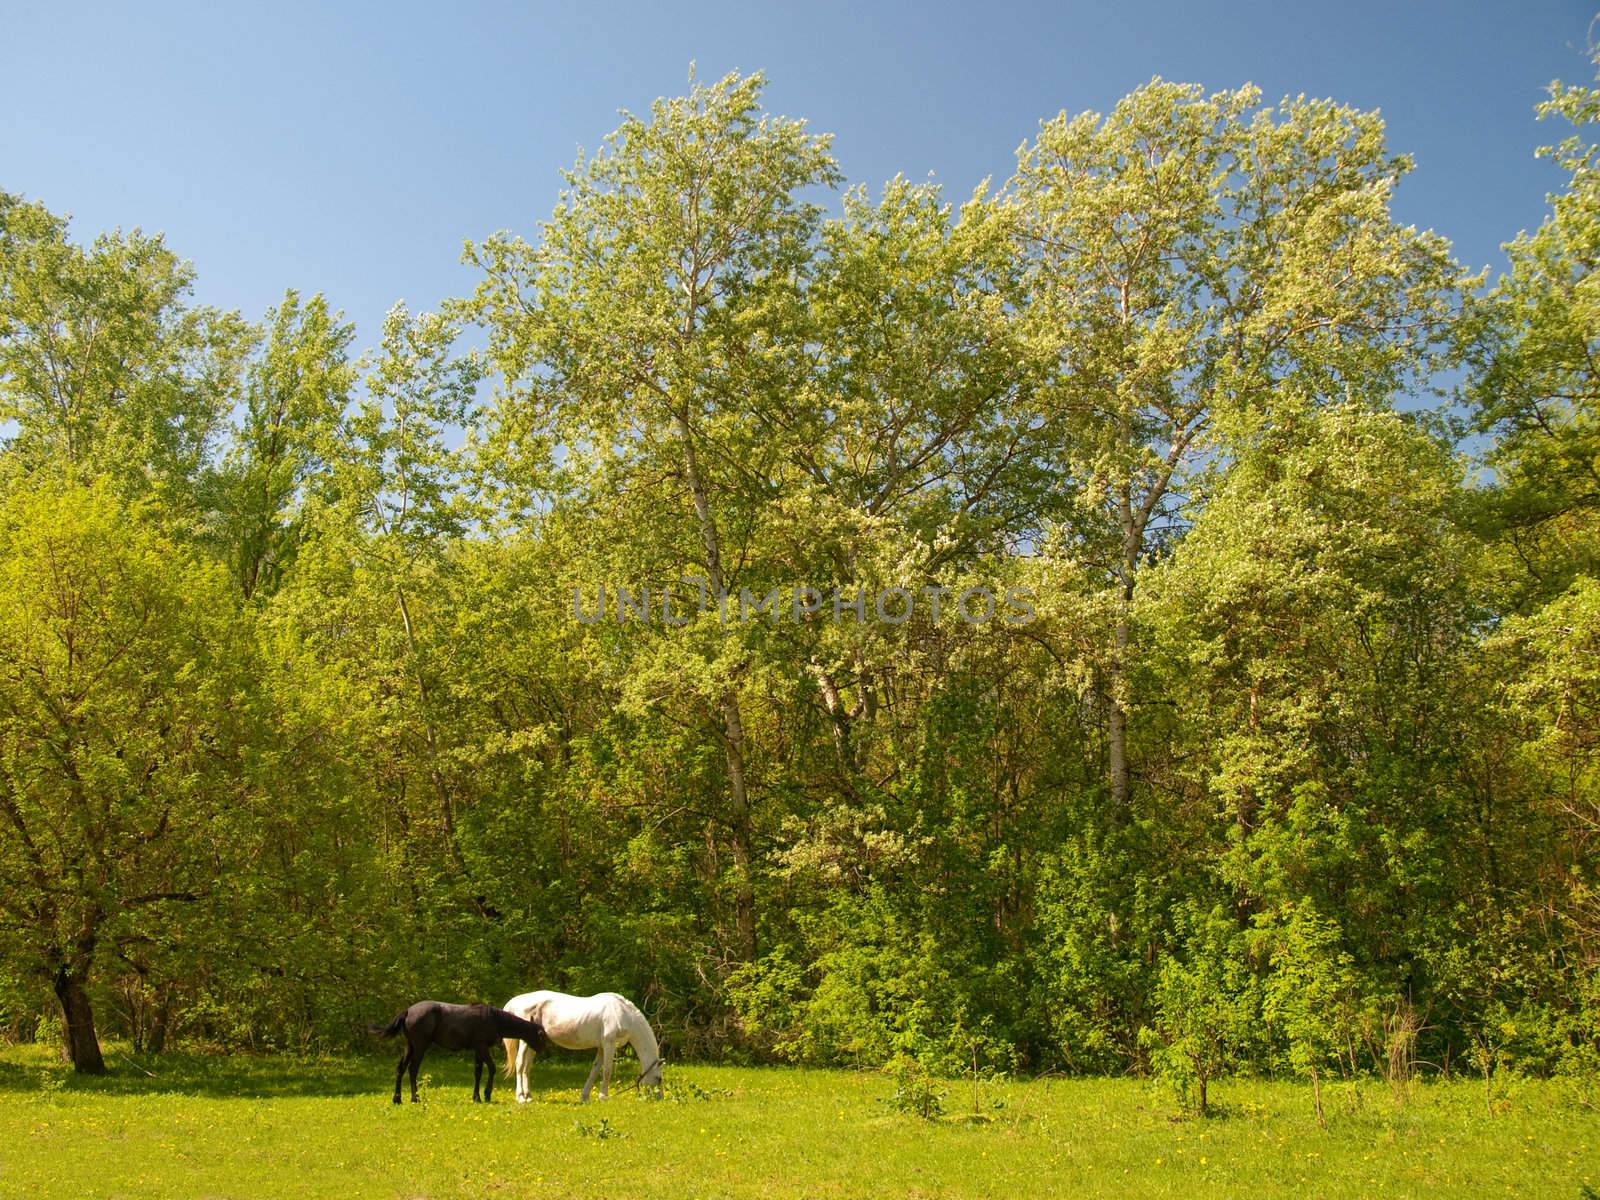 Sunlit spring meadow with two horses